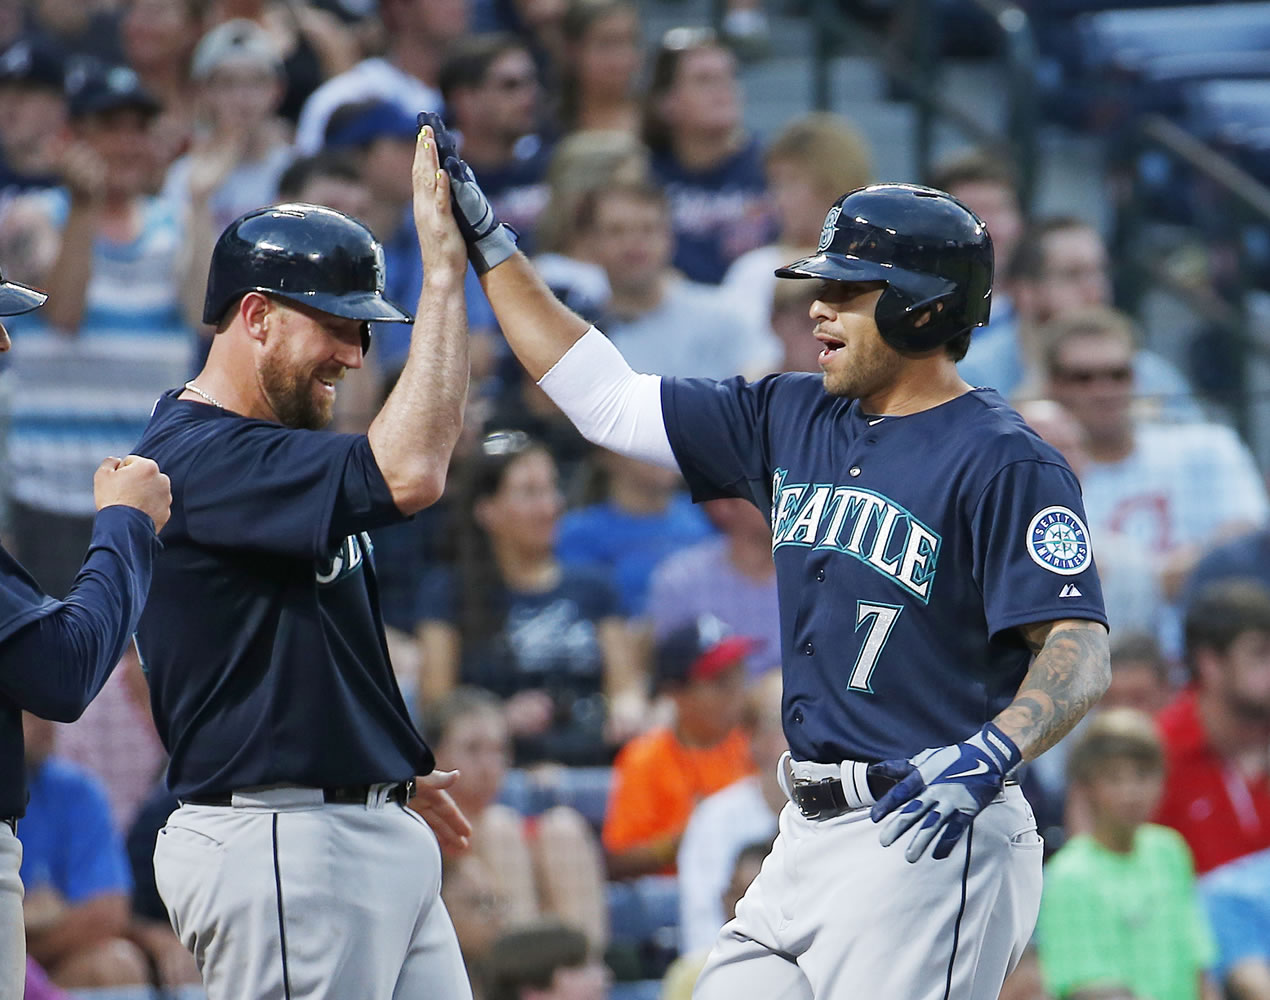 Seattle Mariners pinch-hitter Stefen Romero (7) celebrates his three-run homer with John Buck in the fourth inning of a baseball game against the Atlanta Braves on Tuesday in Atlanta.